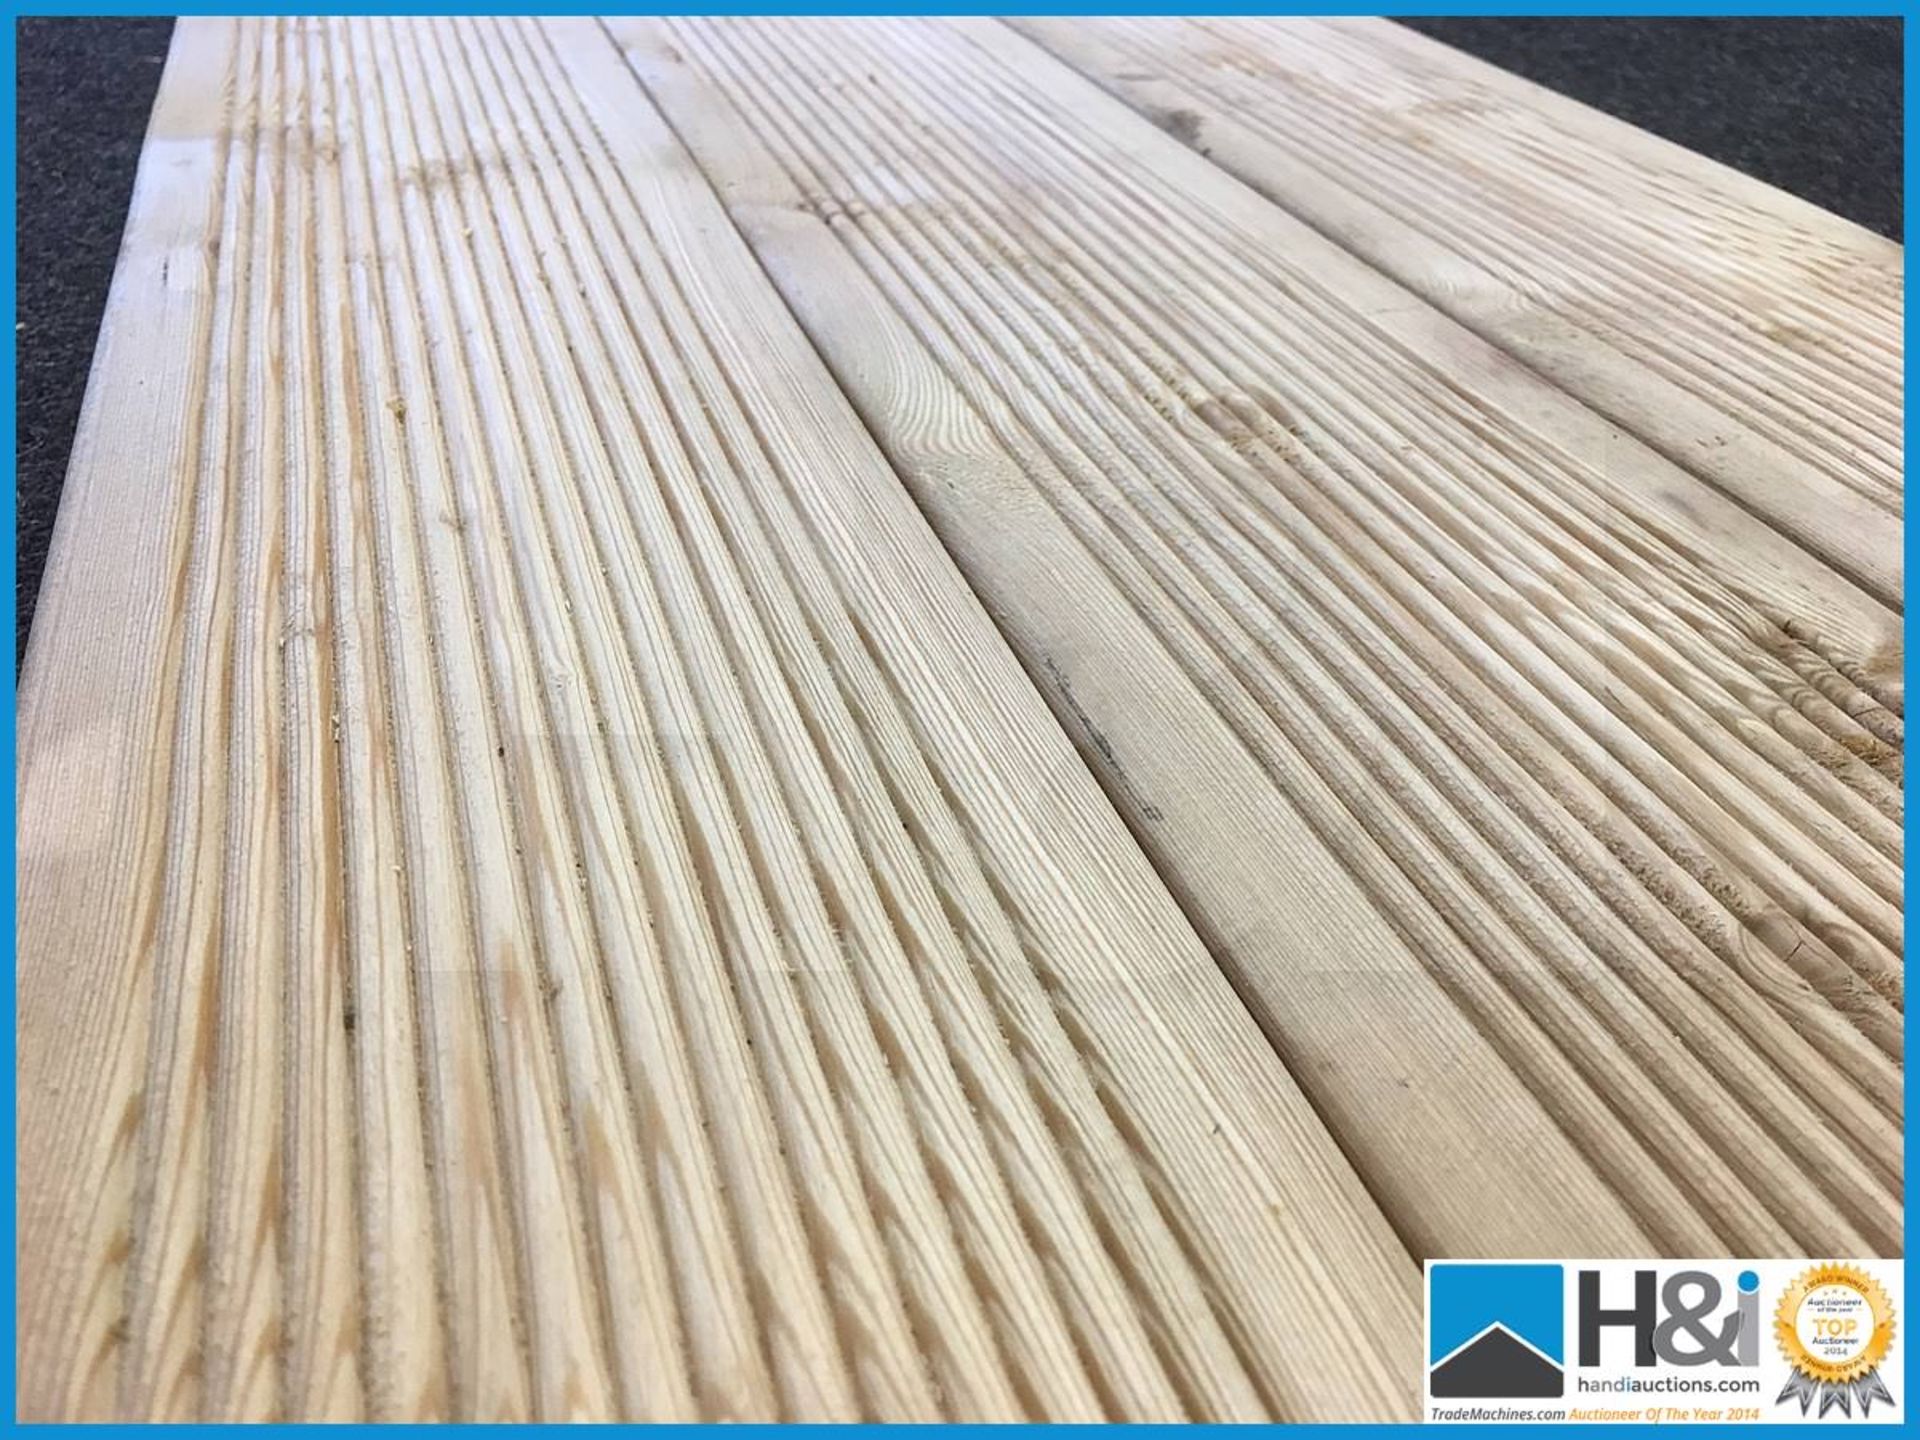 50 sq m of Siberian larch textured decking. New and unused high quality. Requires no treatment and - Image 7 of 7